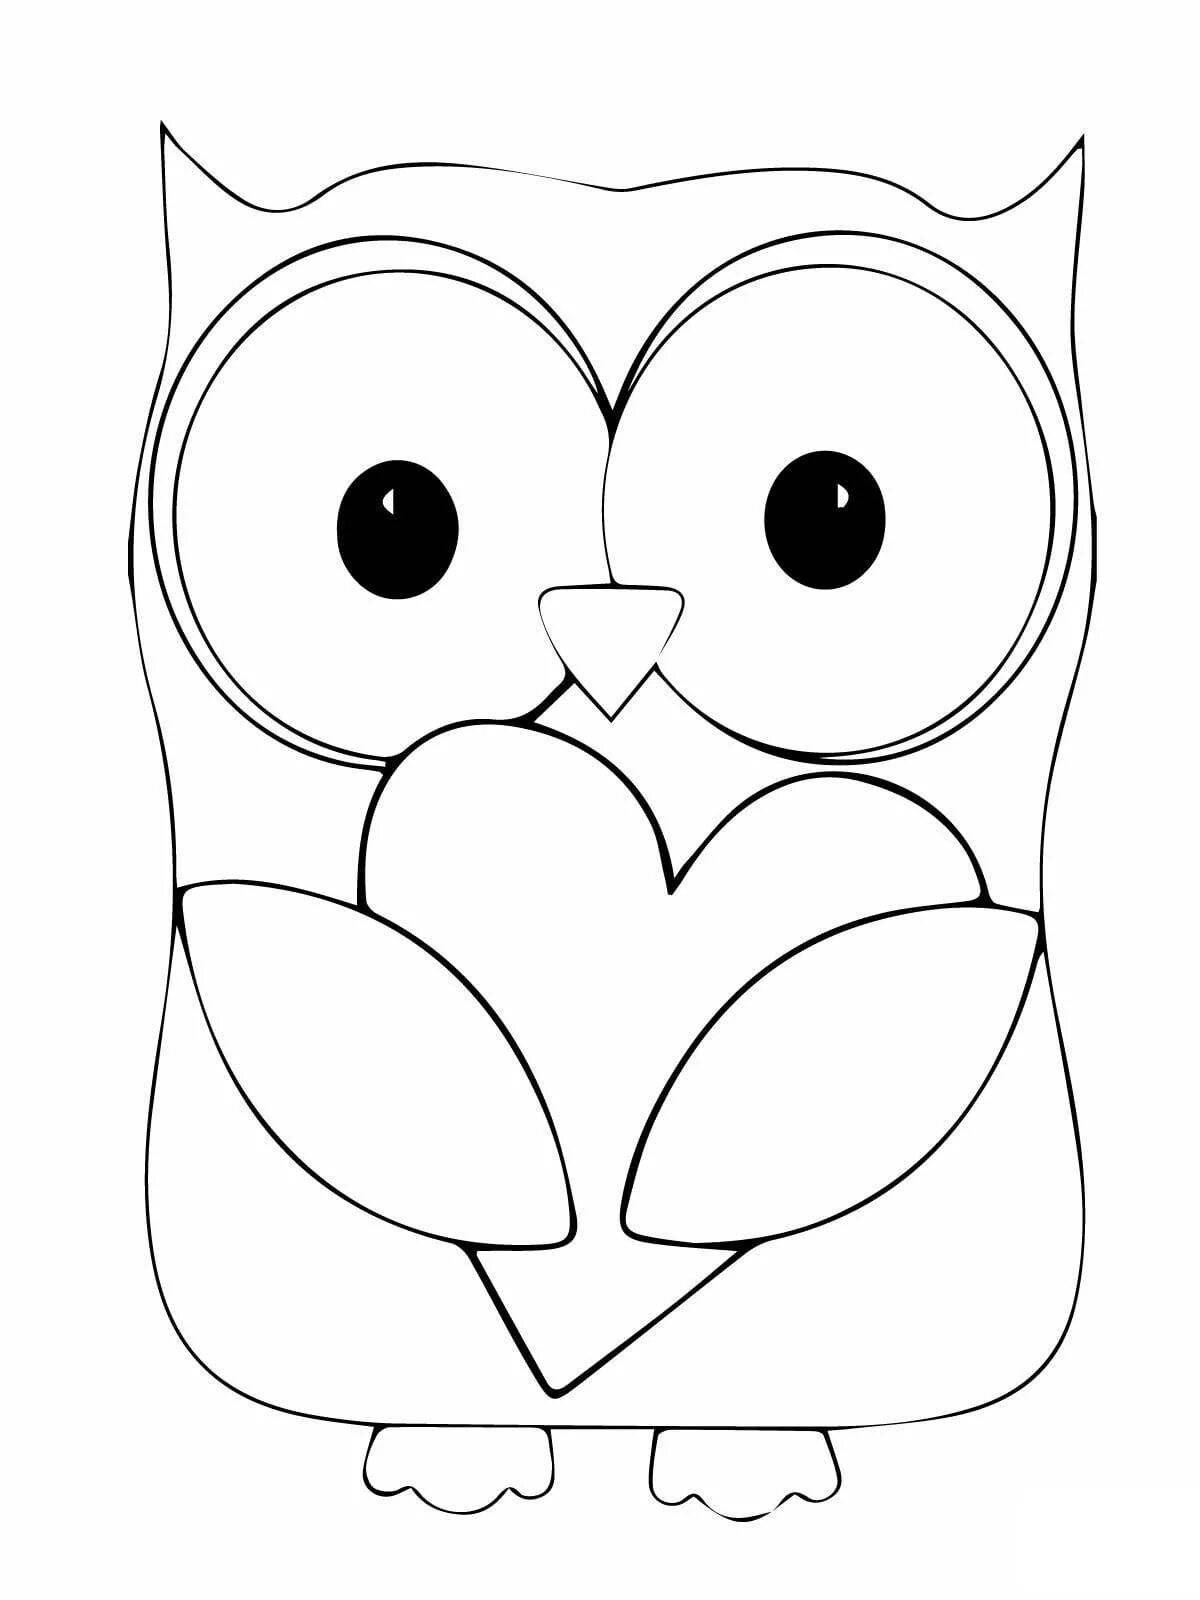 Colorful pattern coloring page